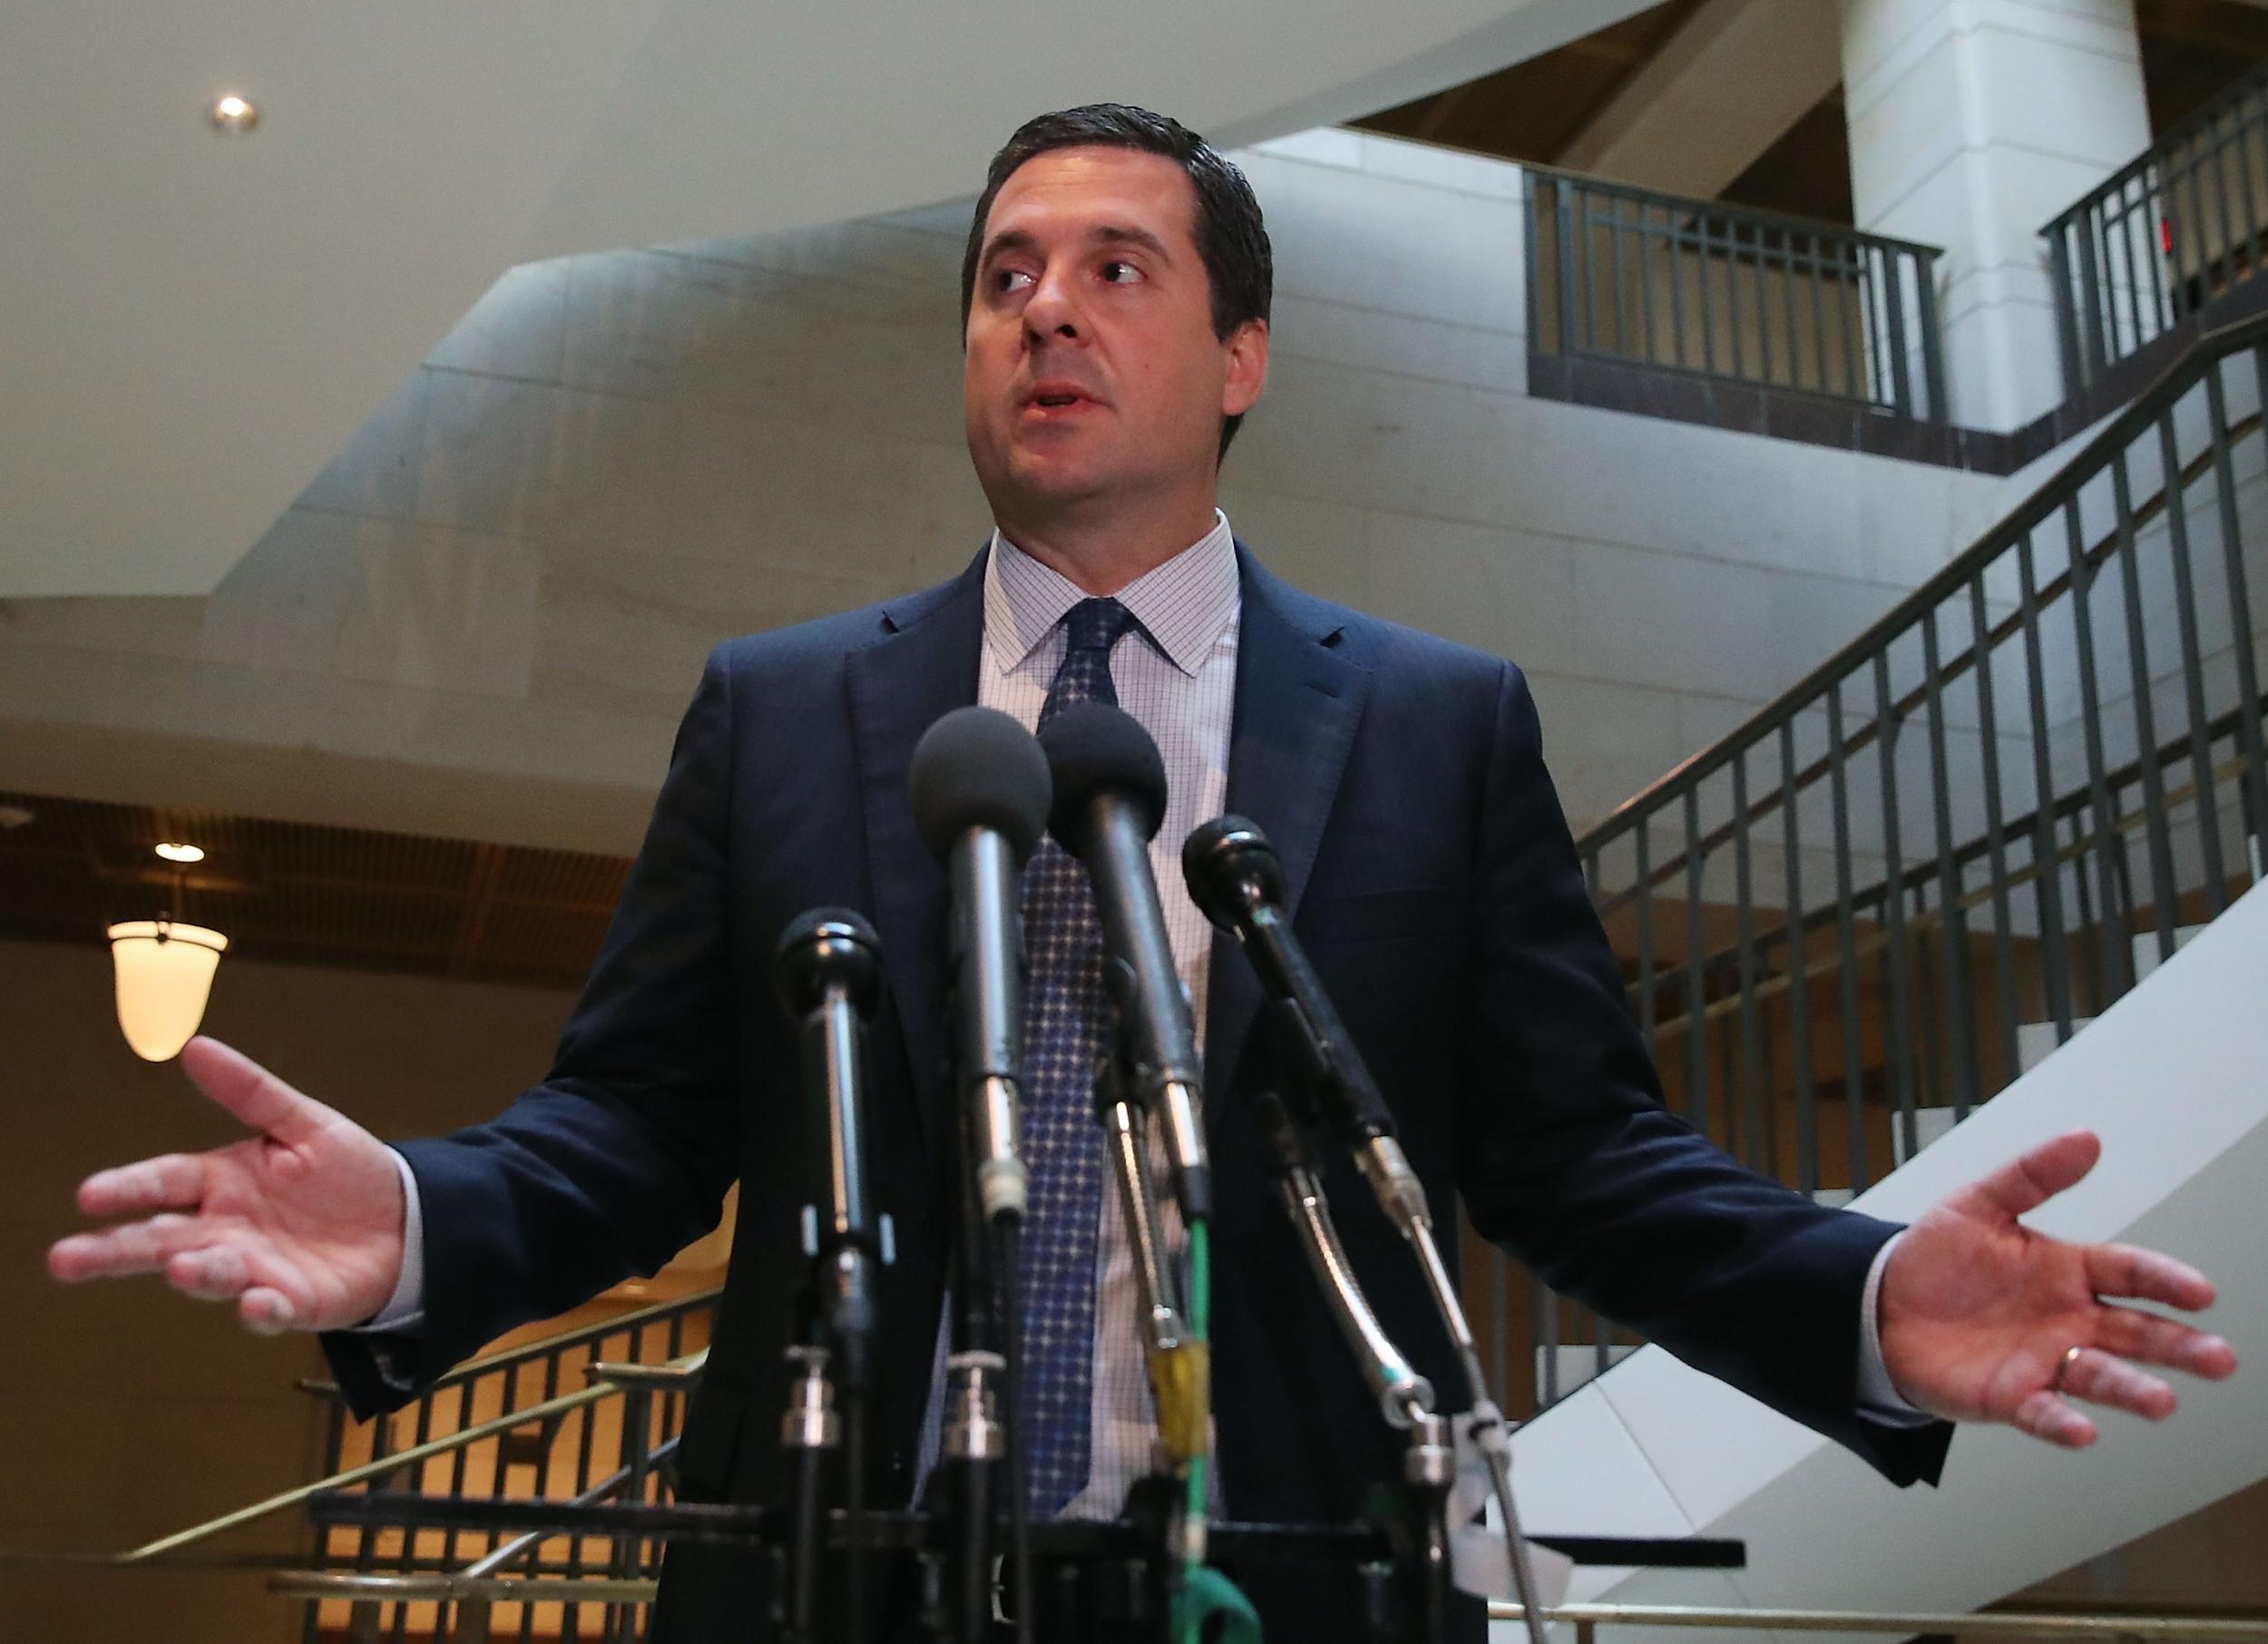 Questions: Mr Nunes has been called a Trump ‘surrogate’ by a peer on the committee he heads investigating alleged links to Russia